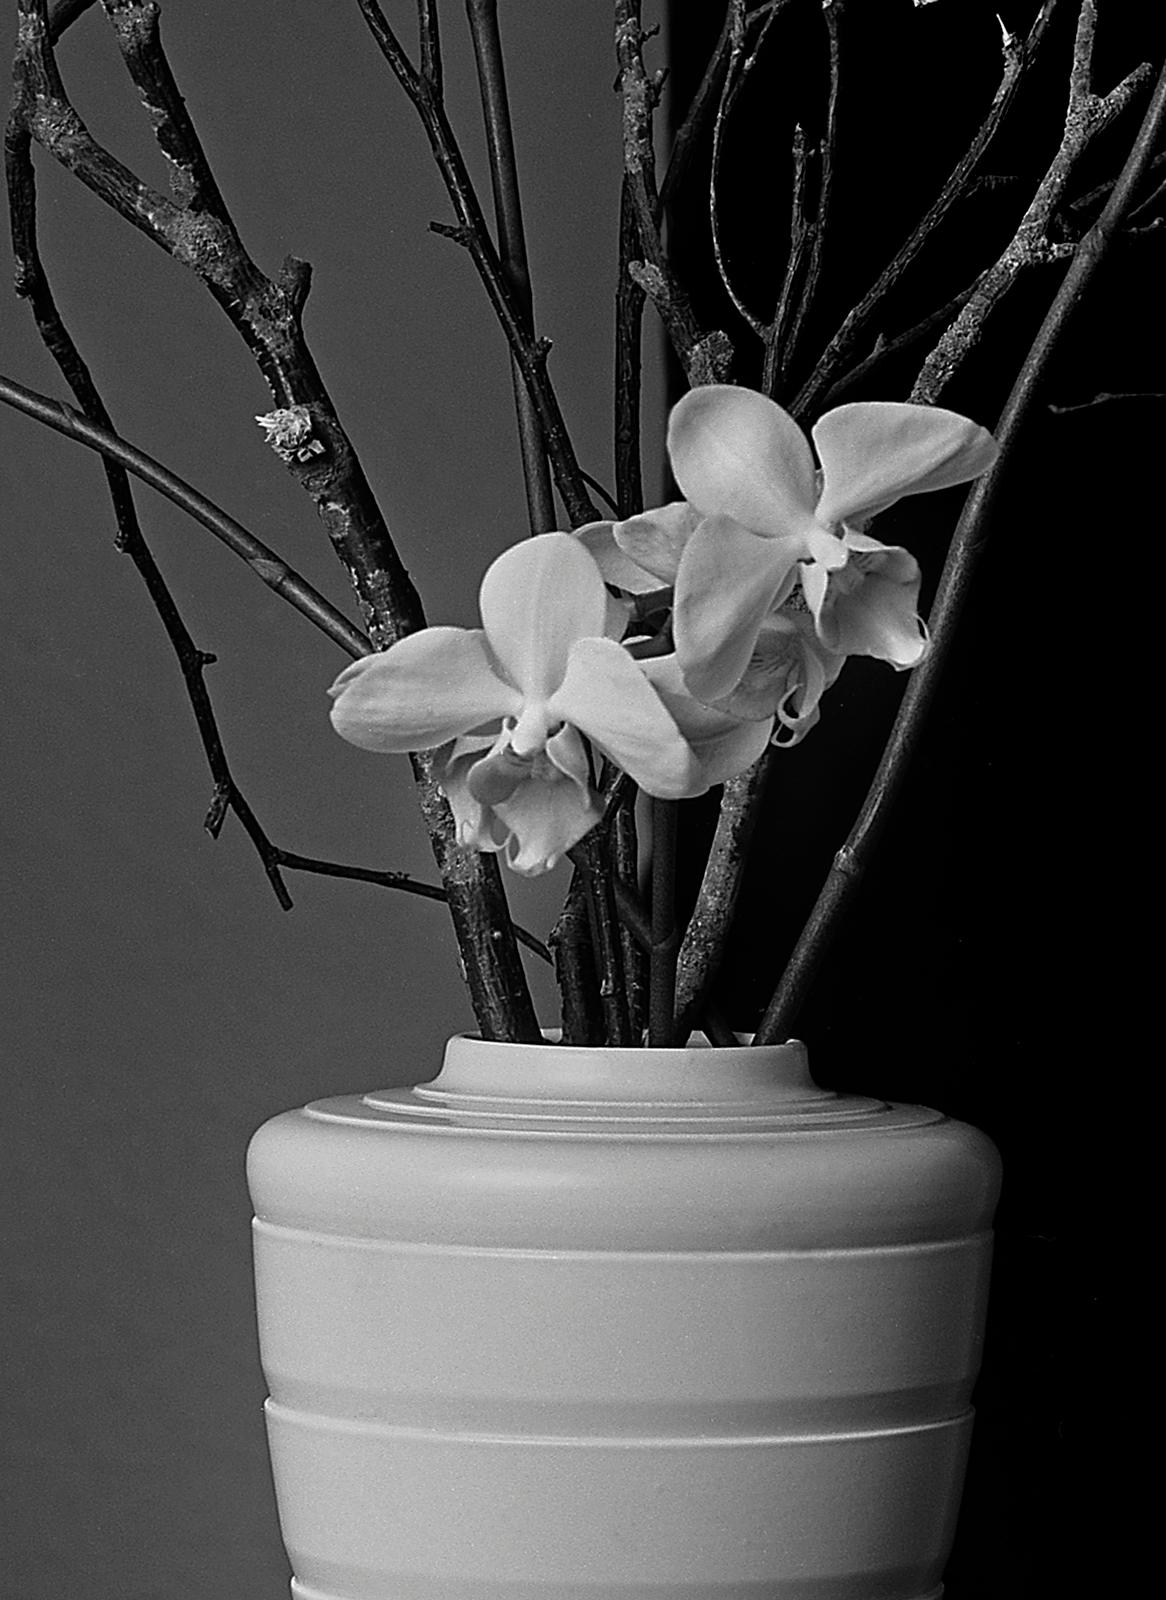 Orchids-Signed limited edition stilllife print, Black white nature photo, Romantic - Photograph by Ian Sanderson